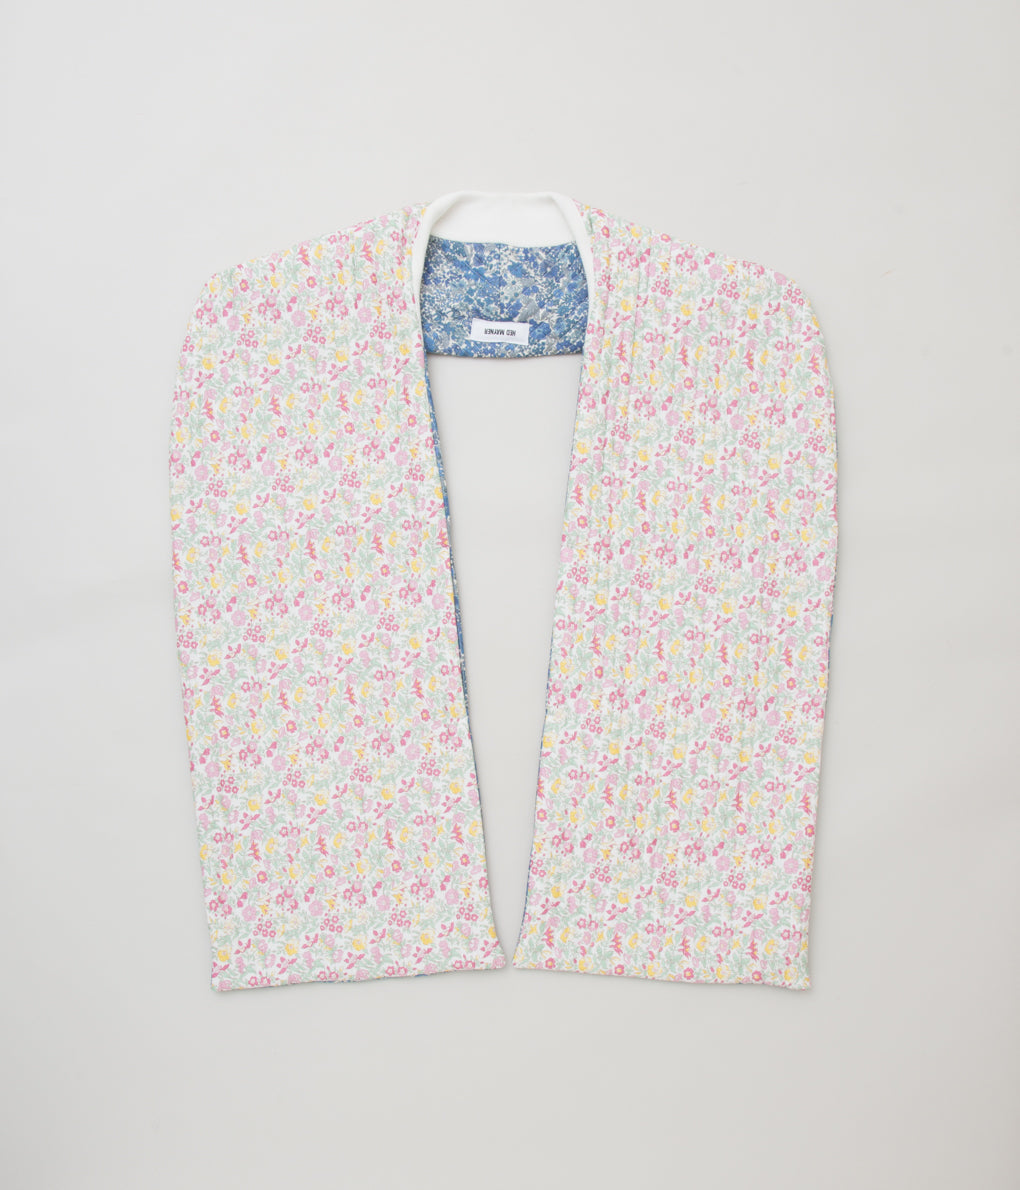 HED MAYNER "REVERSIBLE QUILTED CROPPED COAT" (LIGHT BLUE &amp; ECRU FLOWERS)